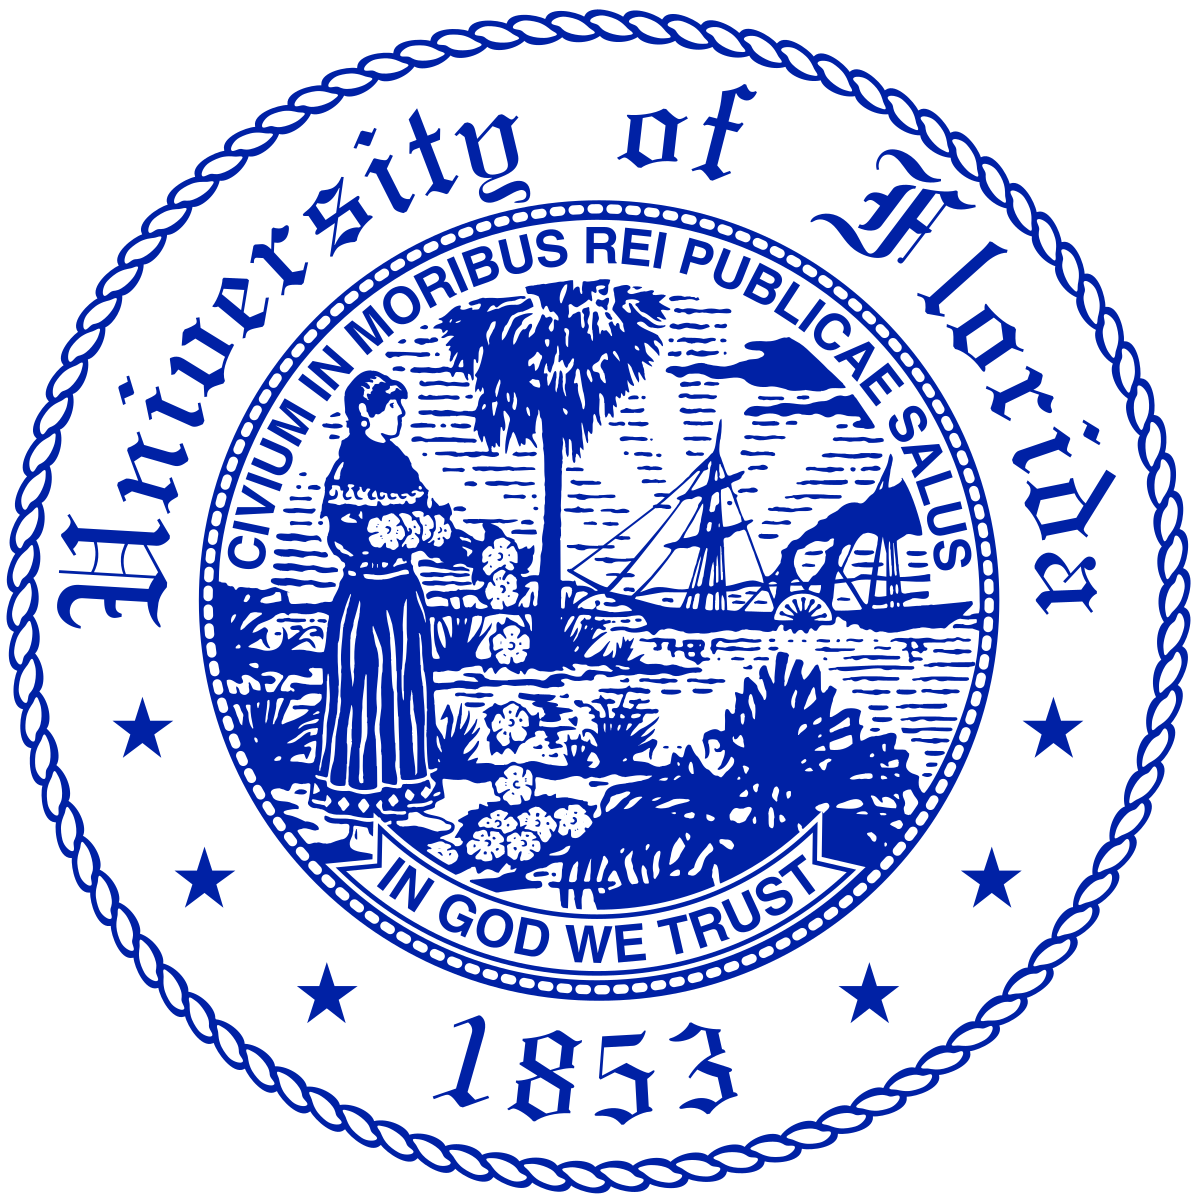 A logo of University of Florida for our school profile